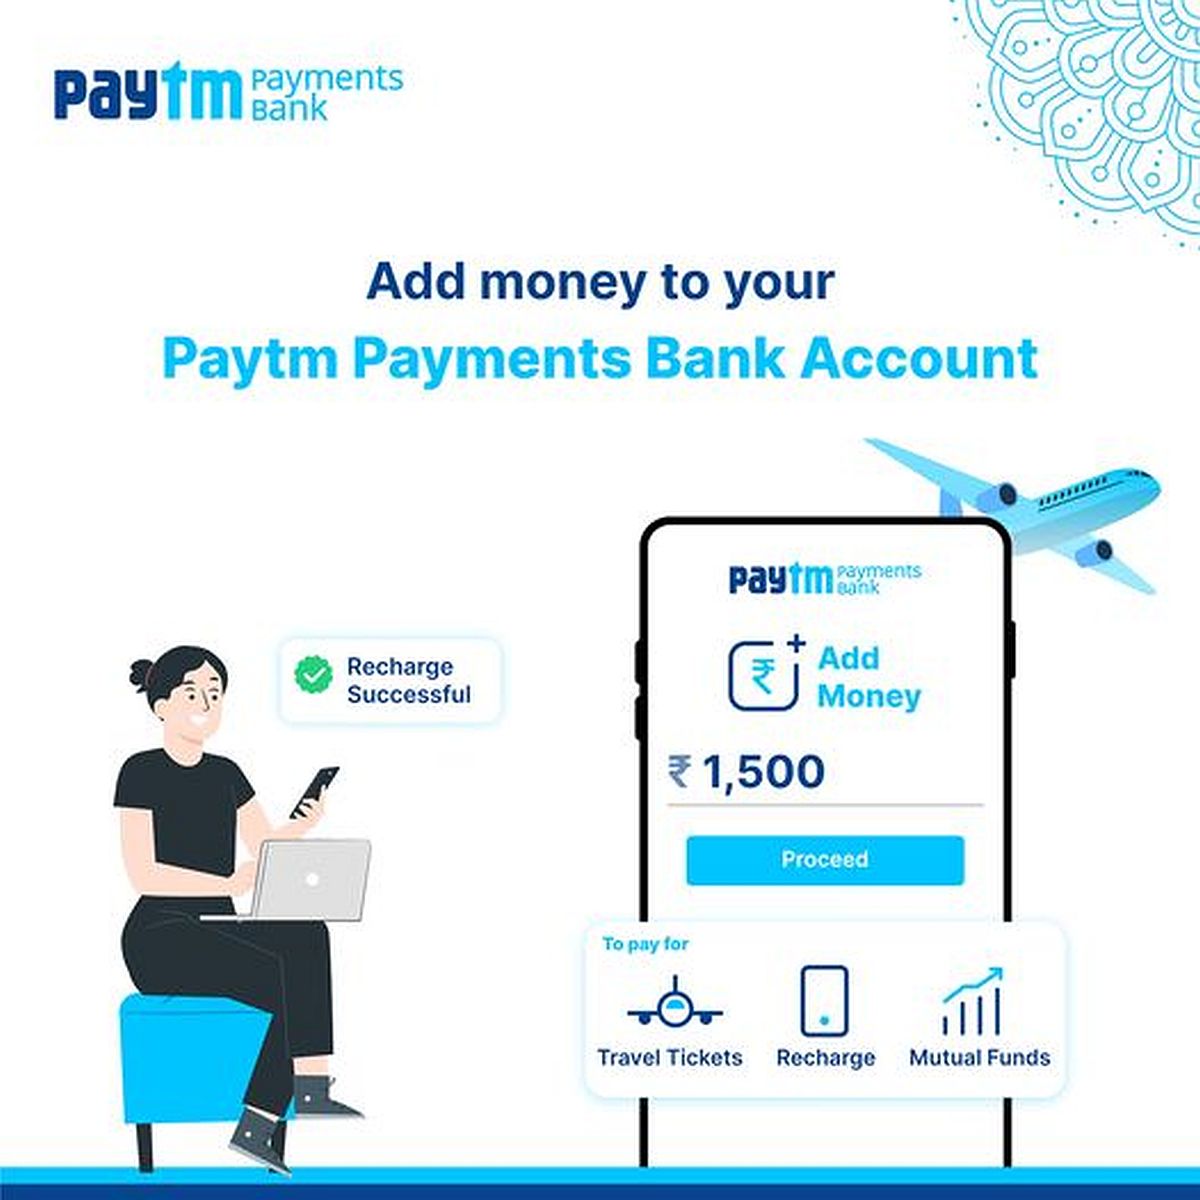 FIU Fines Paytm Payments Bank Rs 5.49 Crore for Money Laundering